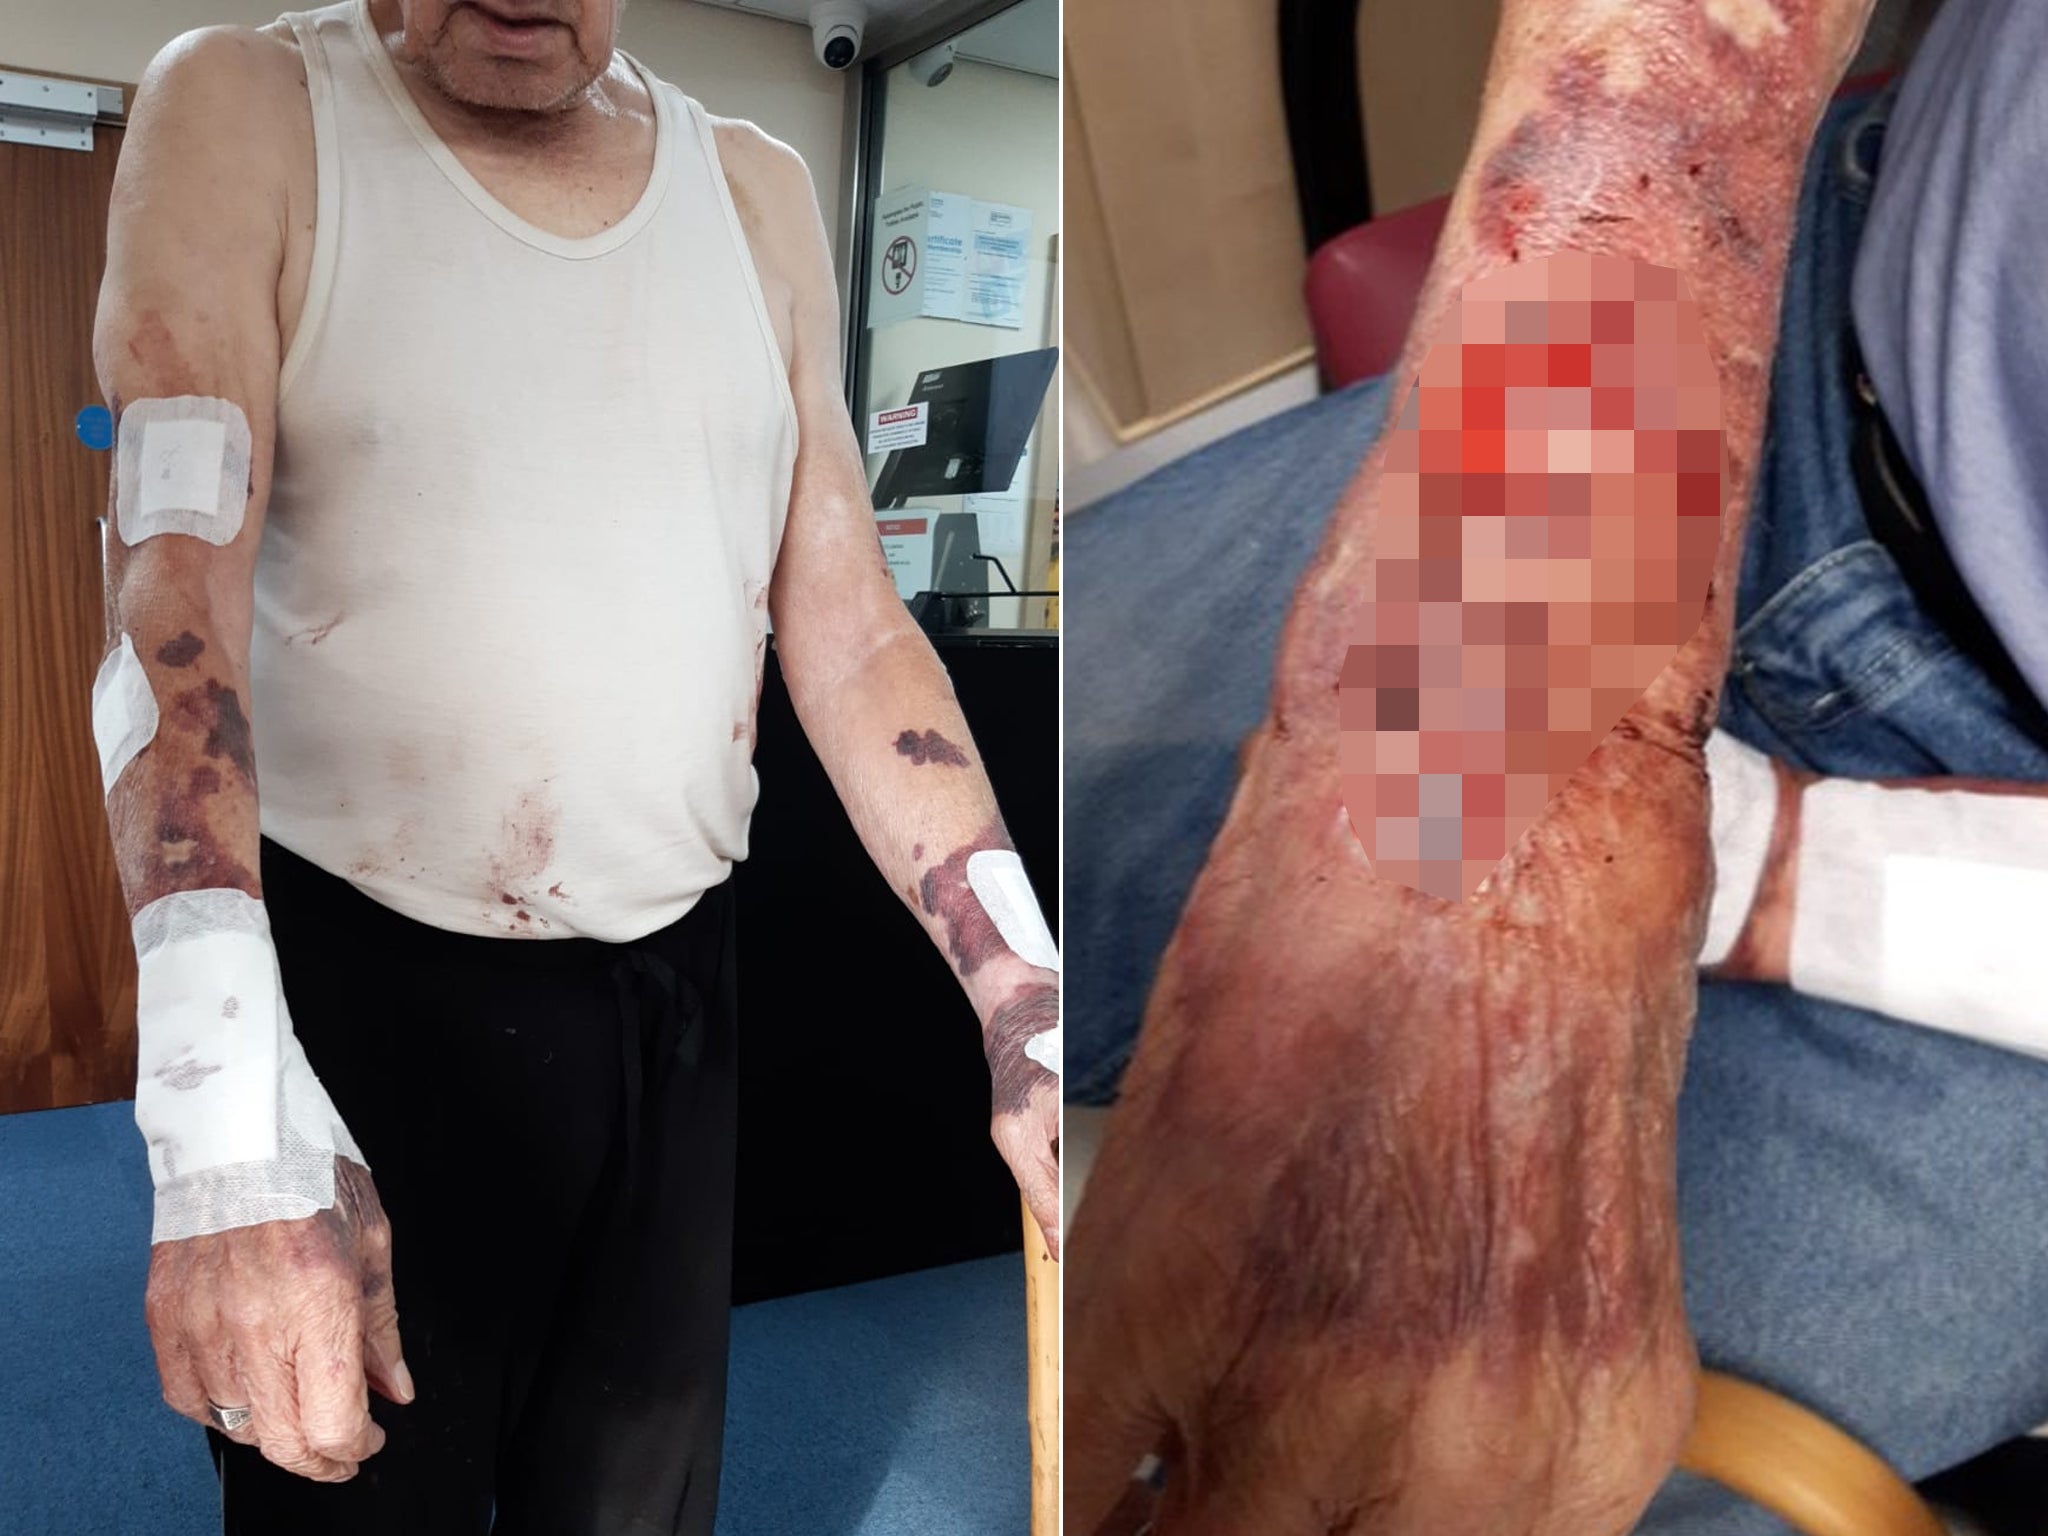 Pictures shared on Twitter show grim injuries on elderly man